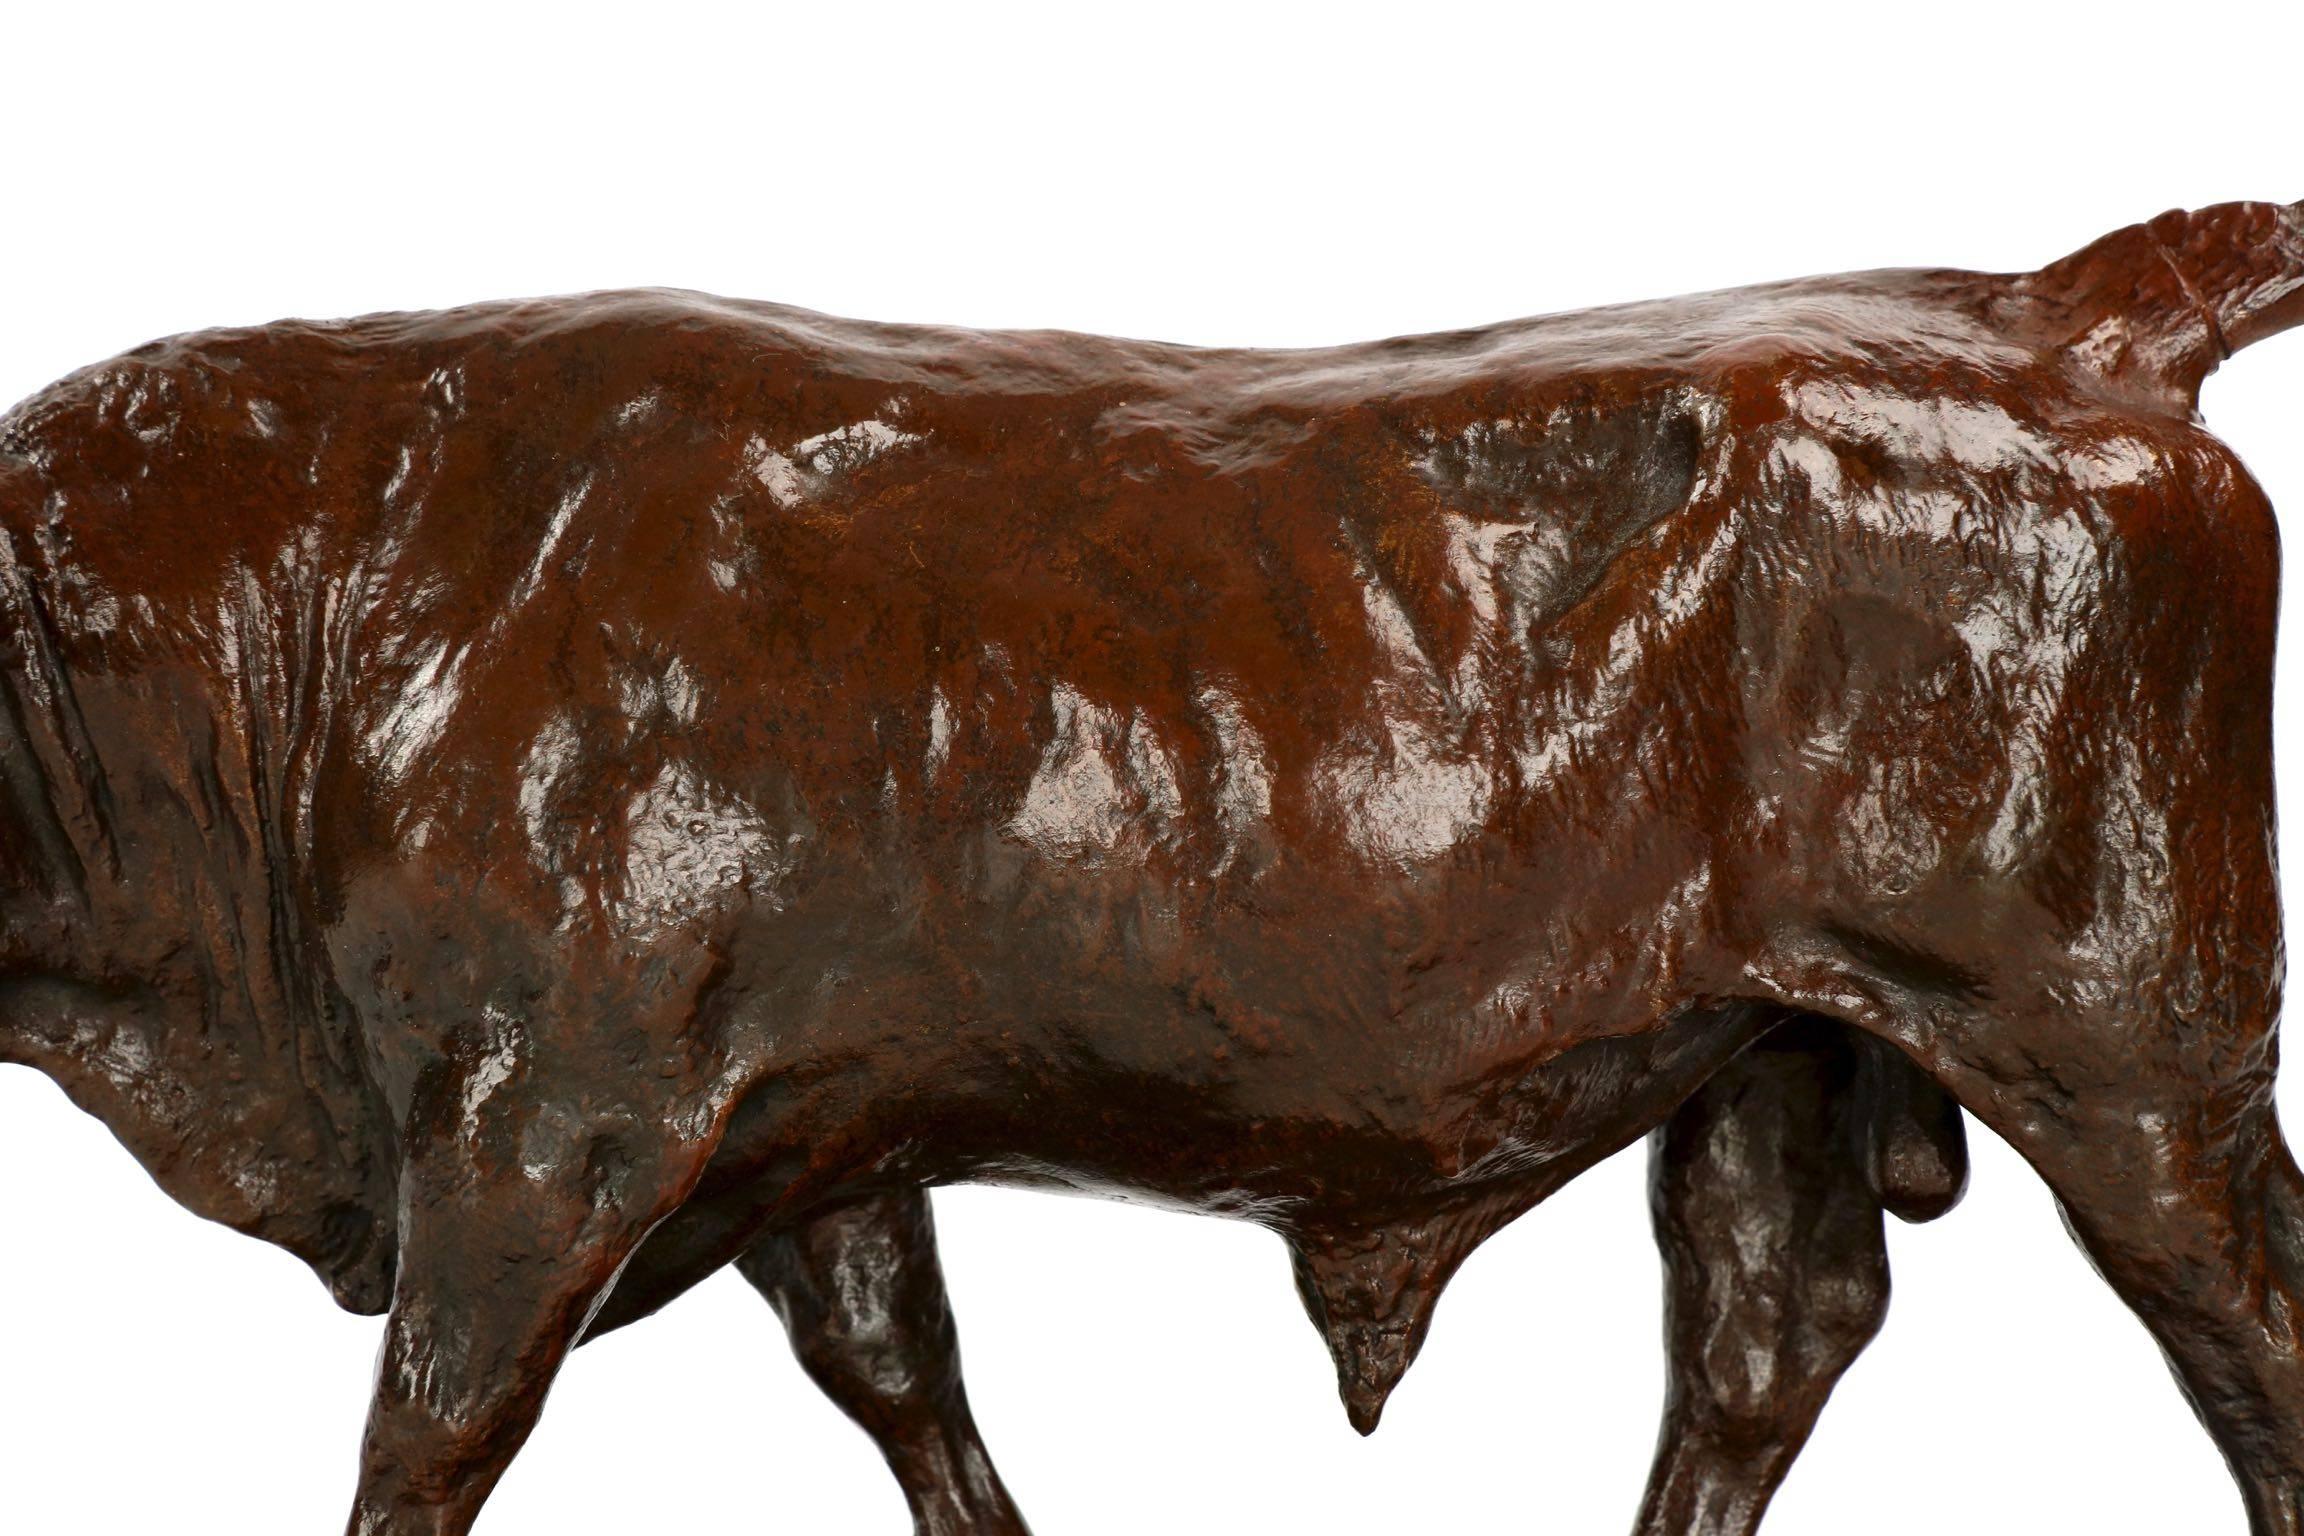 A rare and fine work that is extensively documented in the relatively small body of Rosa Bonheur’s work in bronze, the model captures a walking bull over a naturalistic base. A treacherous and powerful animal, he is portrayed as a lean and